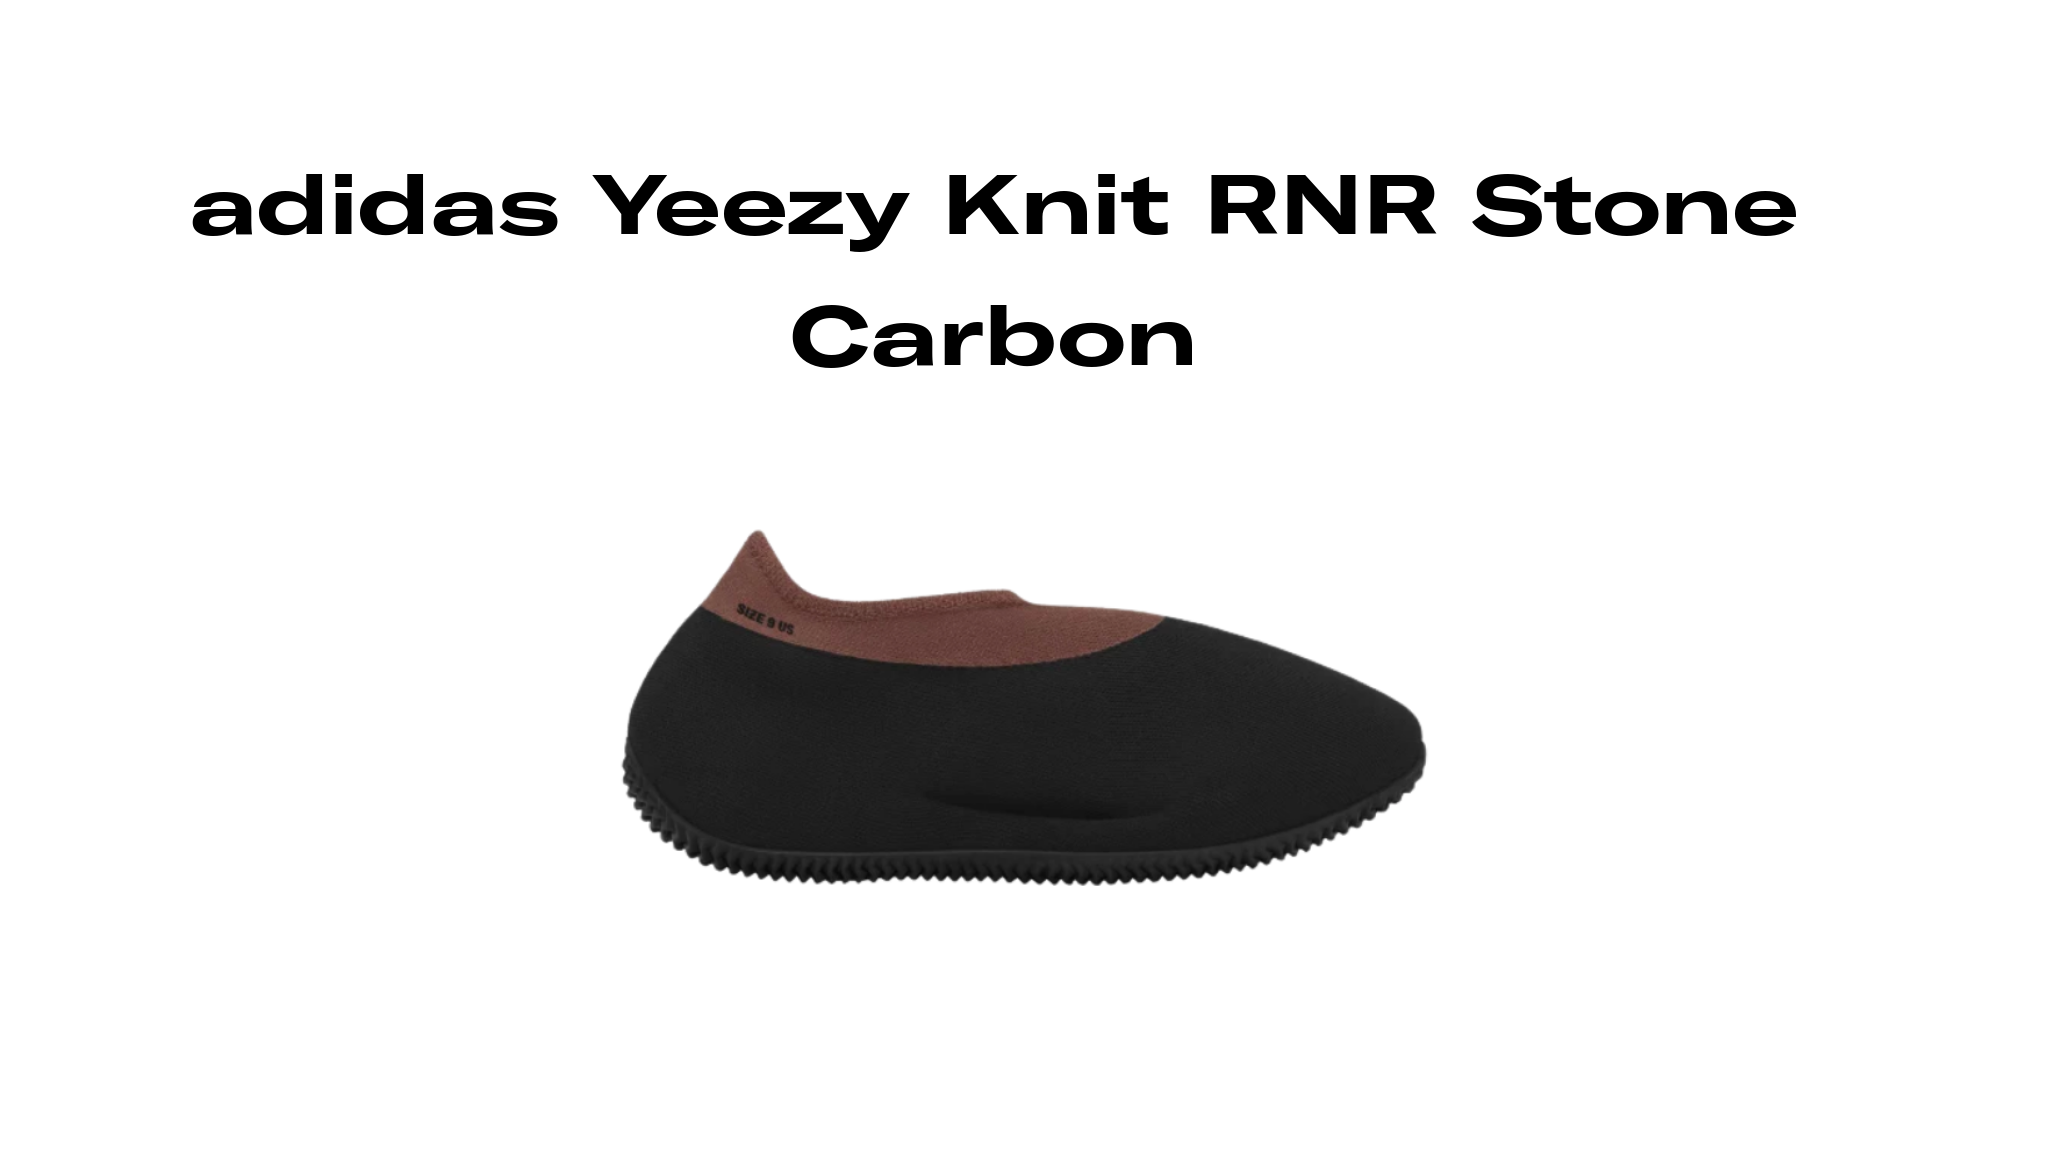 adidas Yeezy Knit RNR Stone Carbon, Raffles and Release Date | Sole